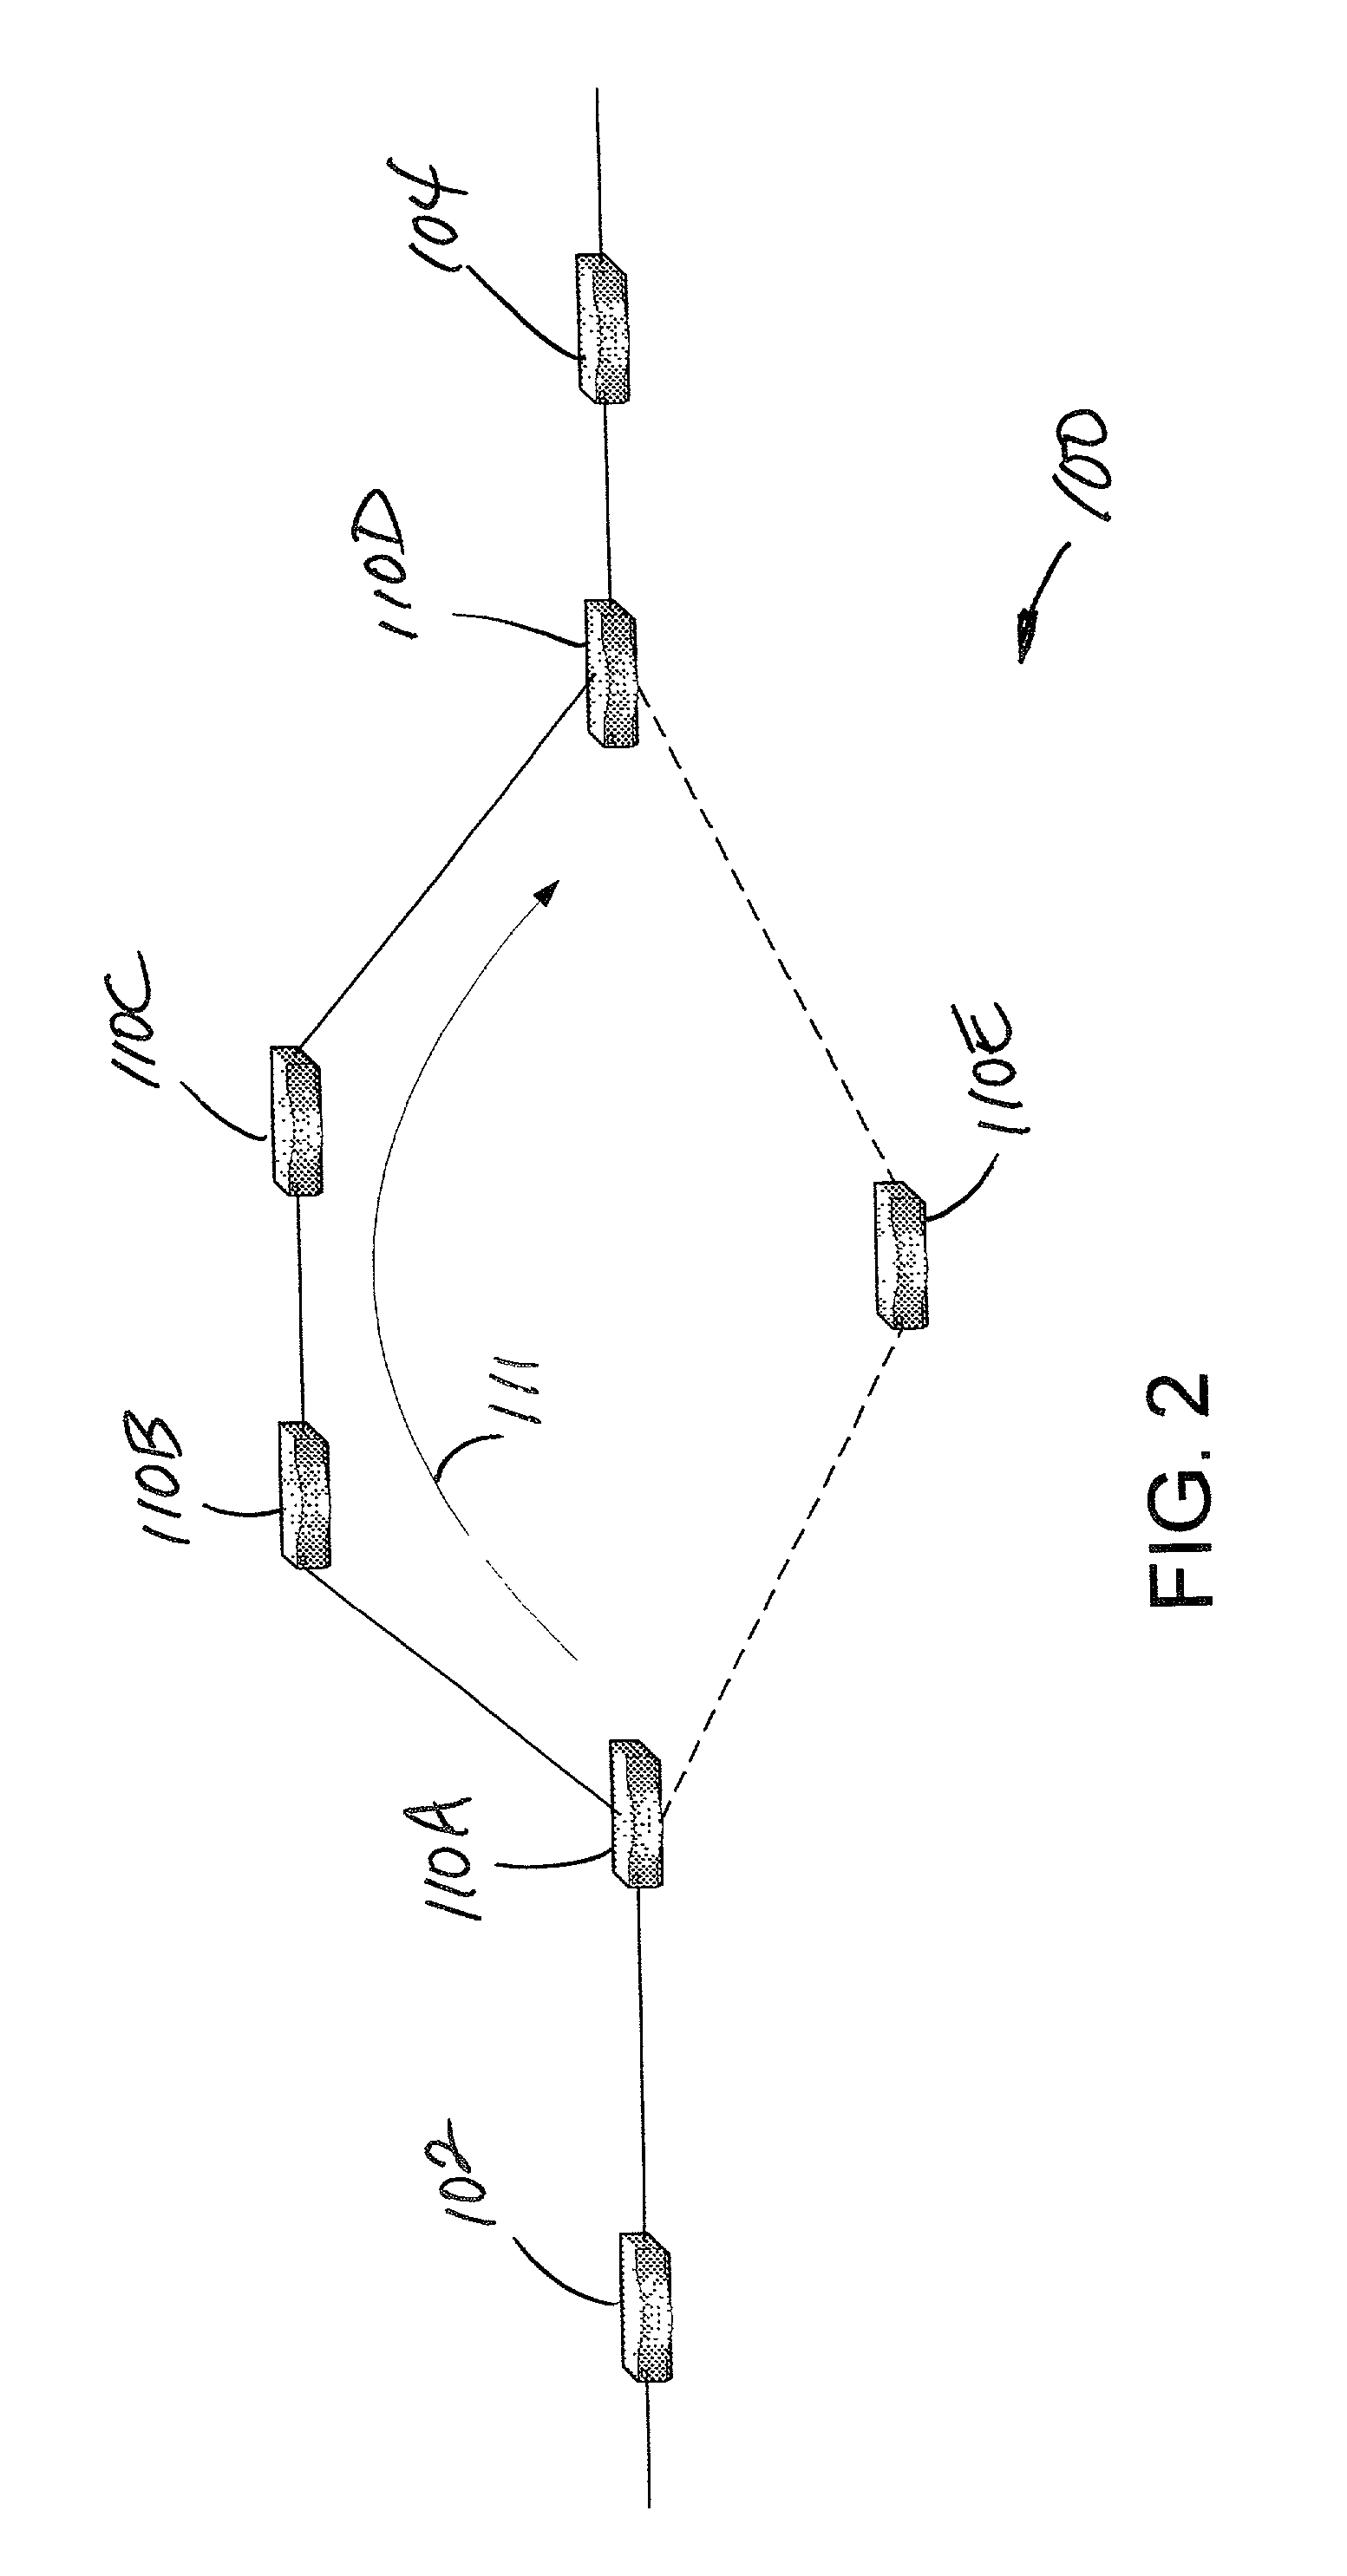 System and method for providing service availability data for a communication network